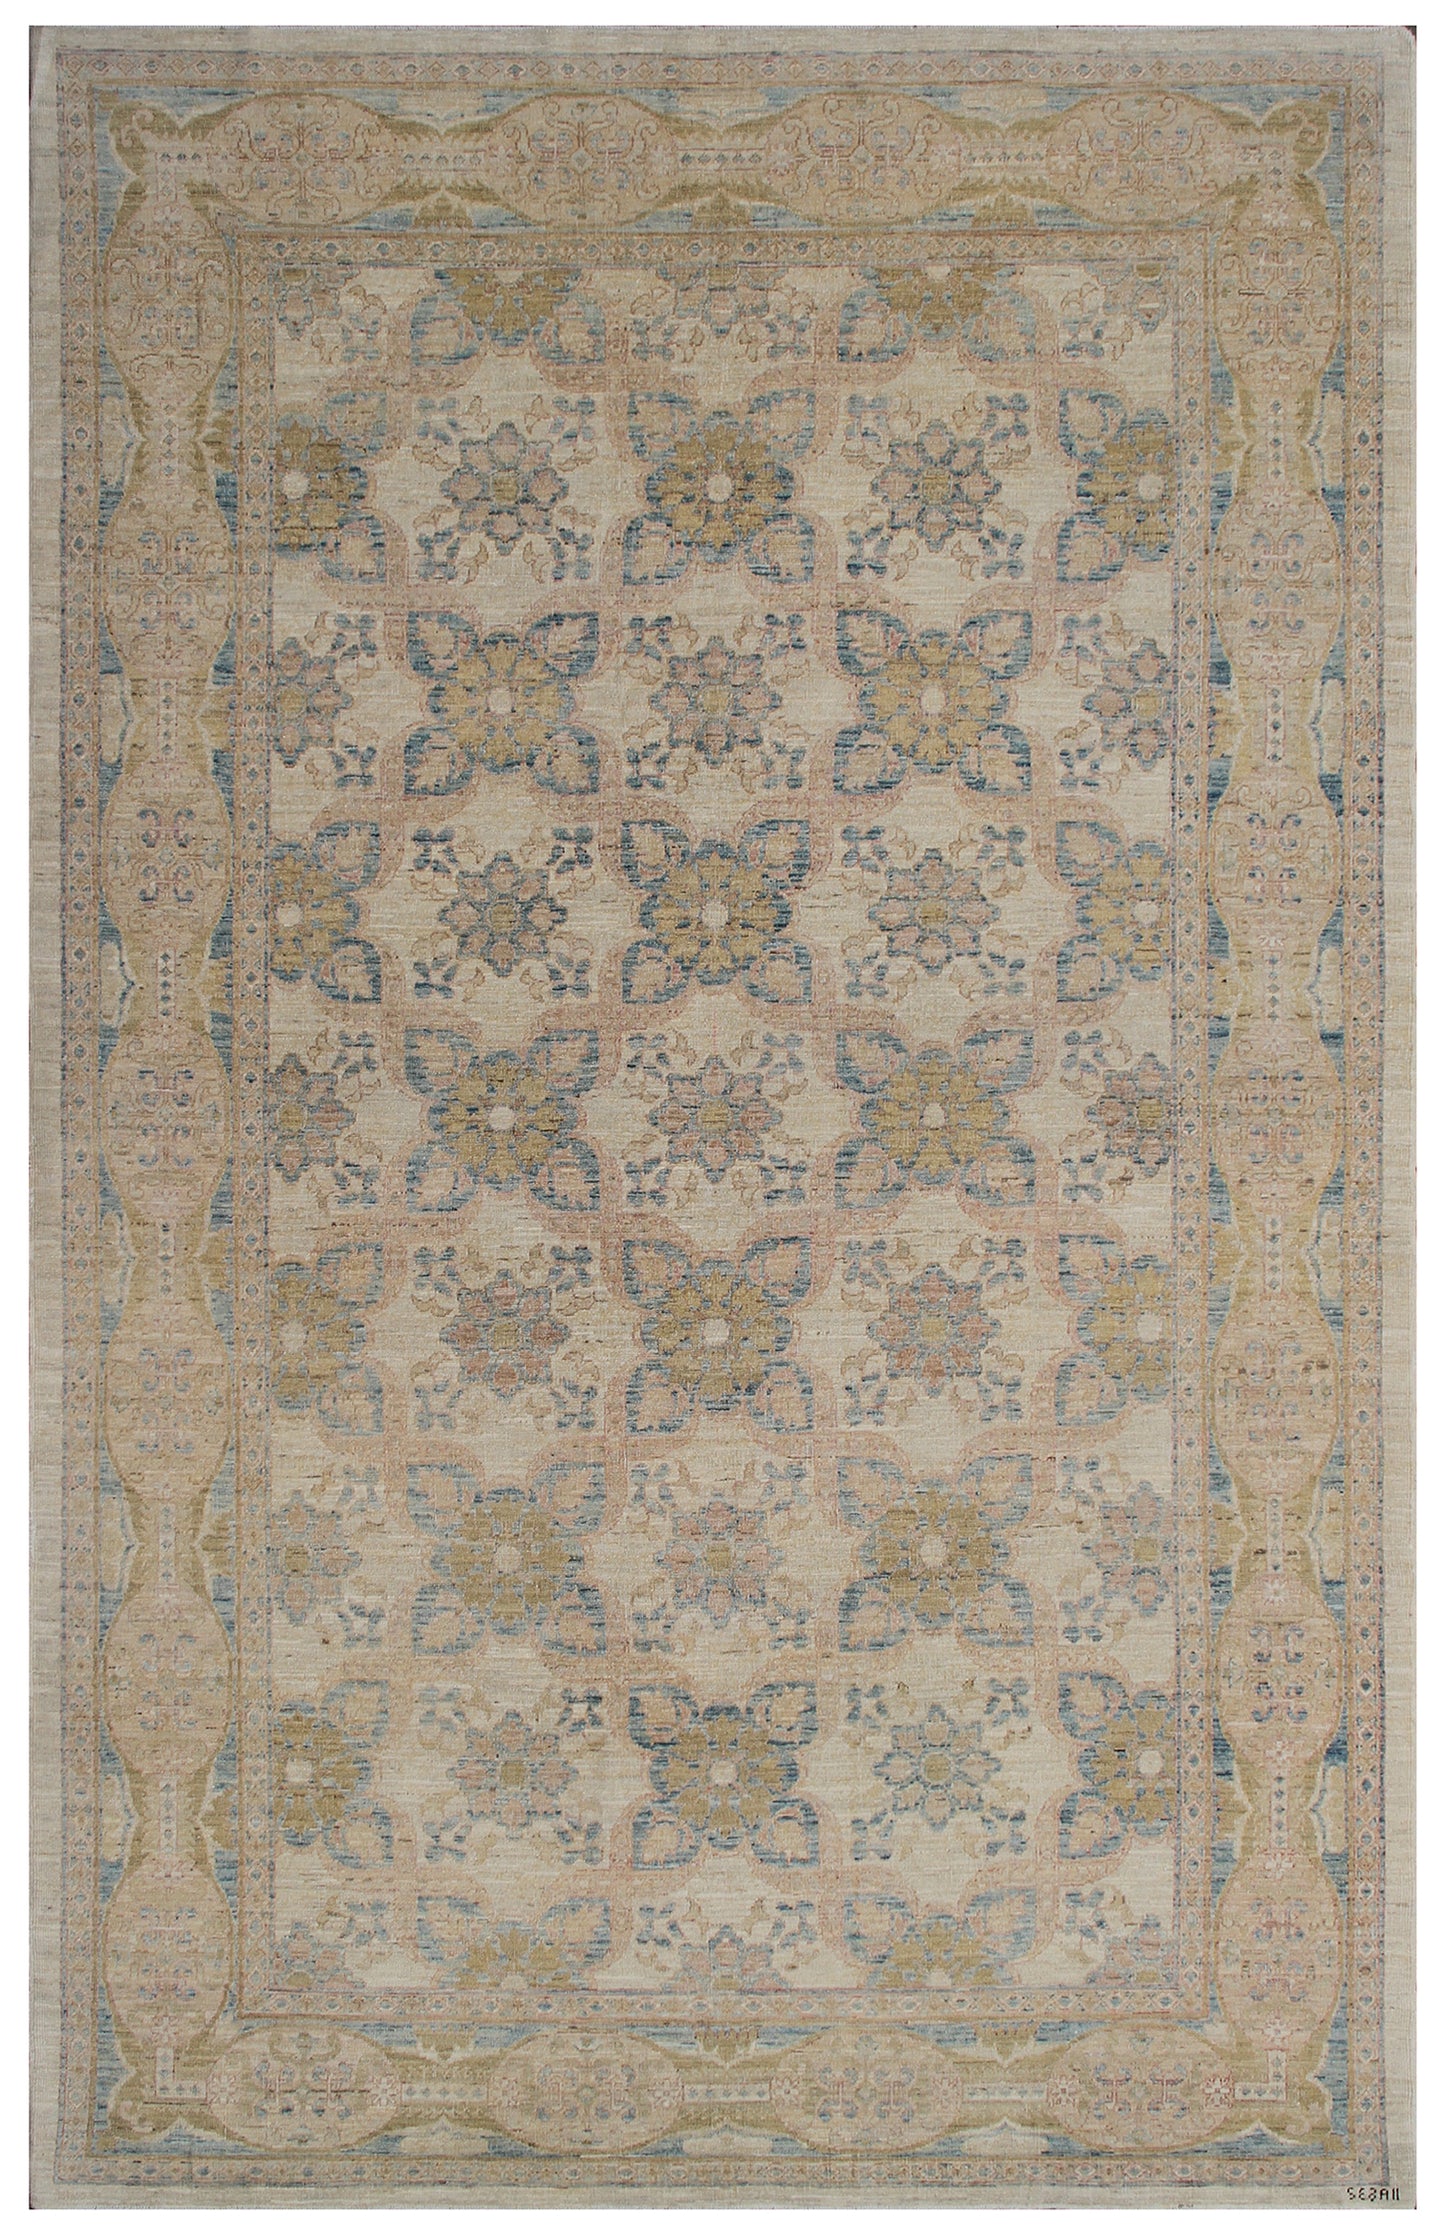 6'x9' Persian Design Great Colors Hand-Knotted Ariana Traditional Rug